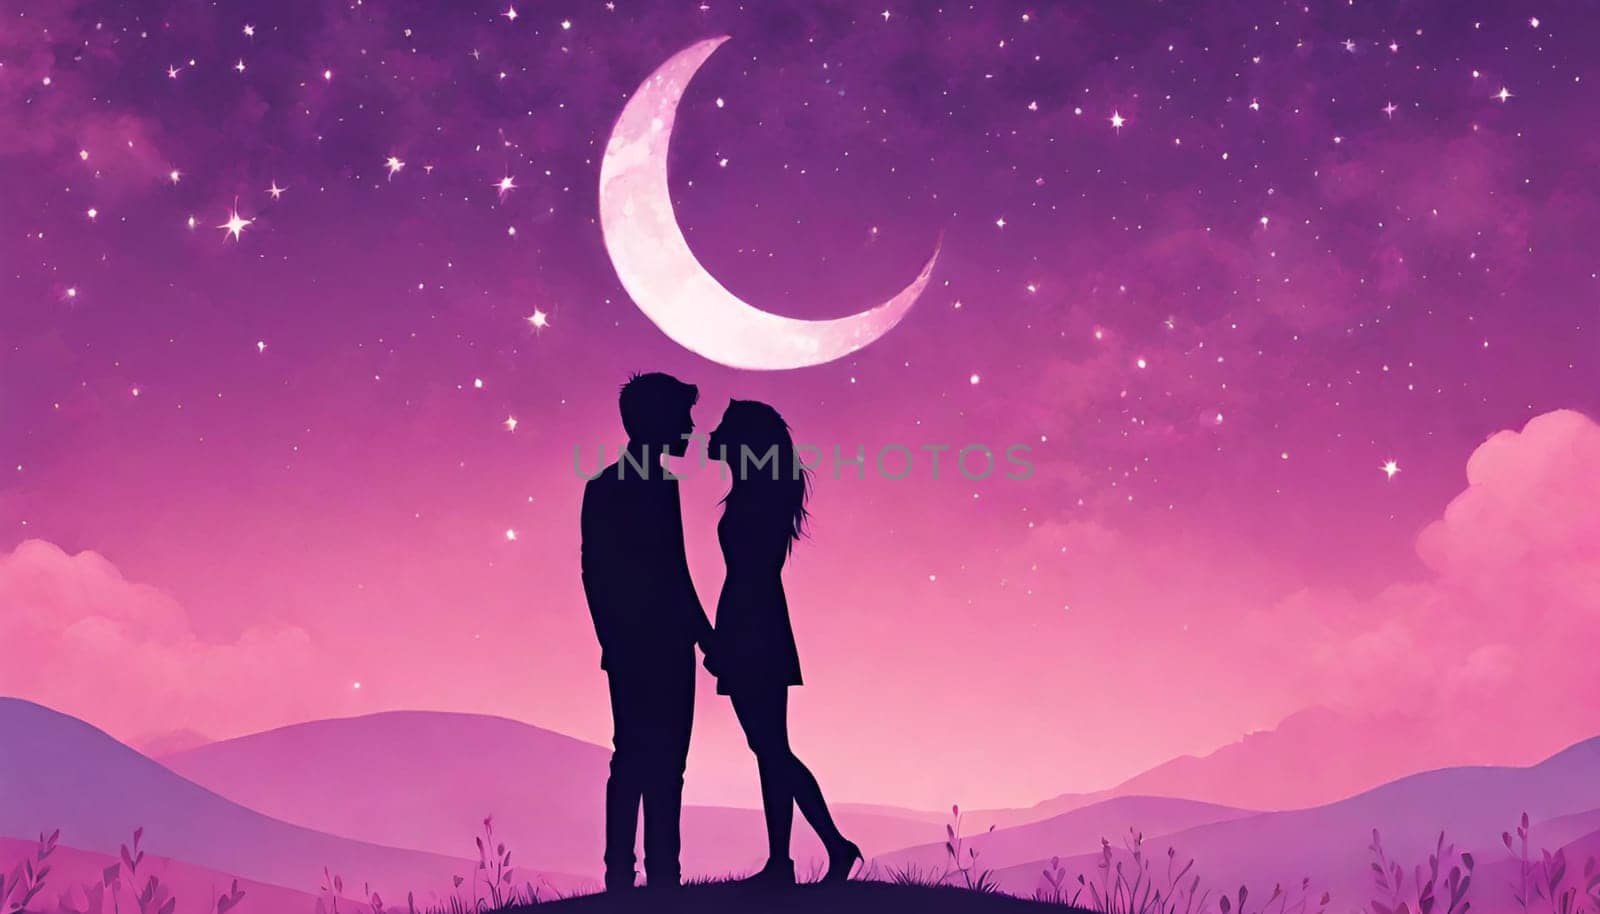 valentine's Day. A pink and purple sky with a crescent moon and stars. with a couple holding hands and kissing in the foreground.Happy Valentine's Day by Designlab